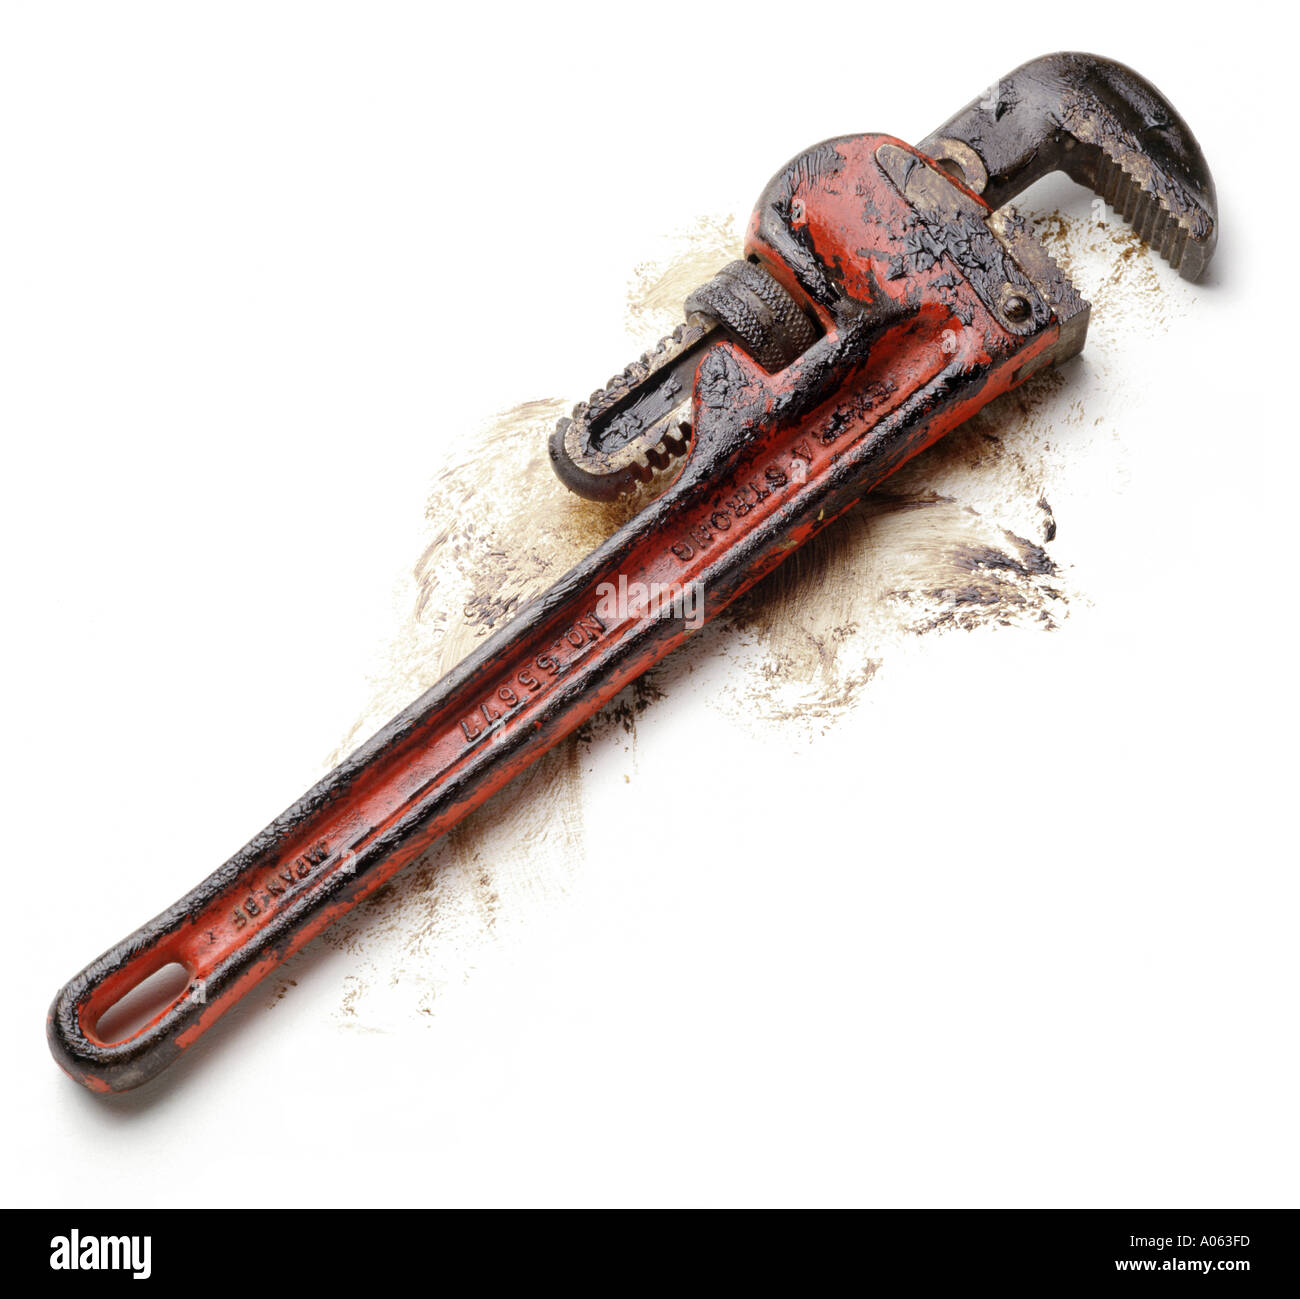 pipe wrench Stock Photo